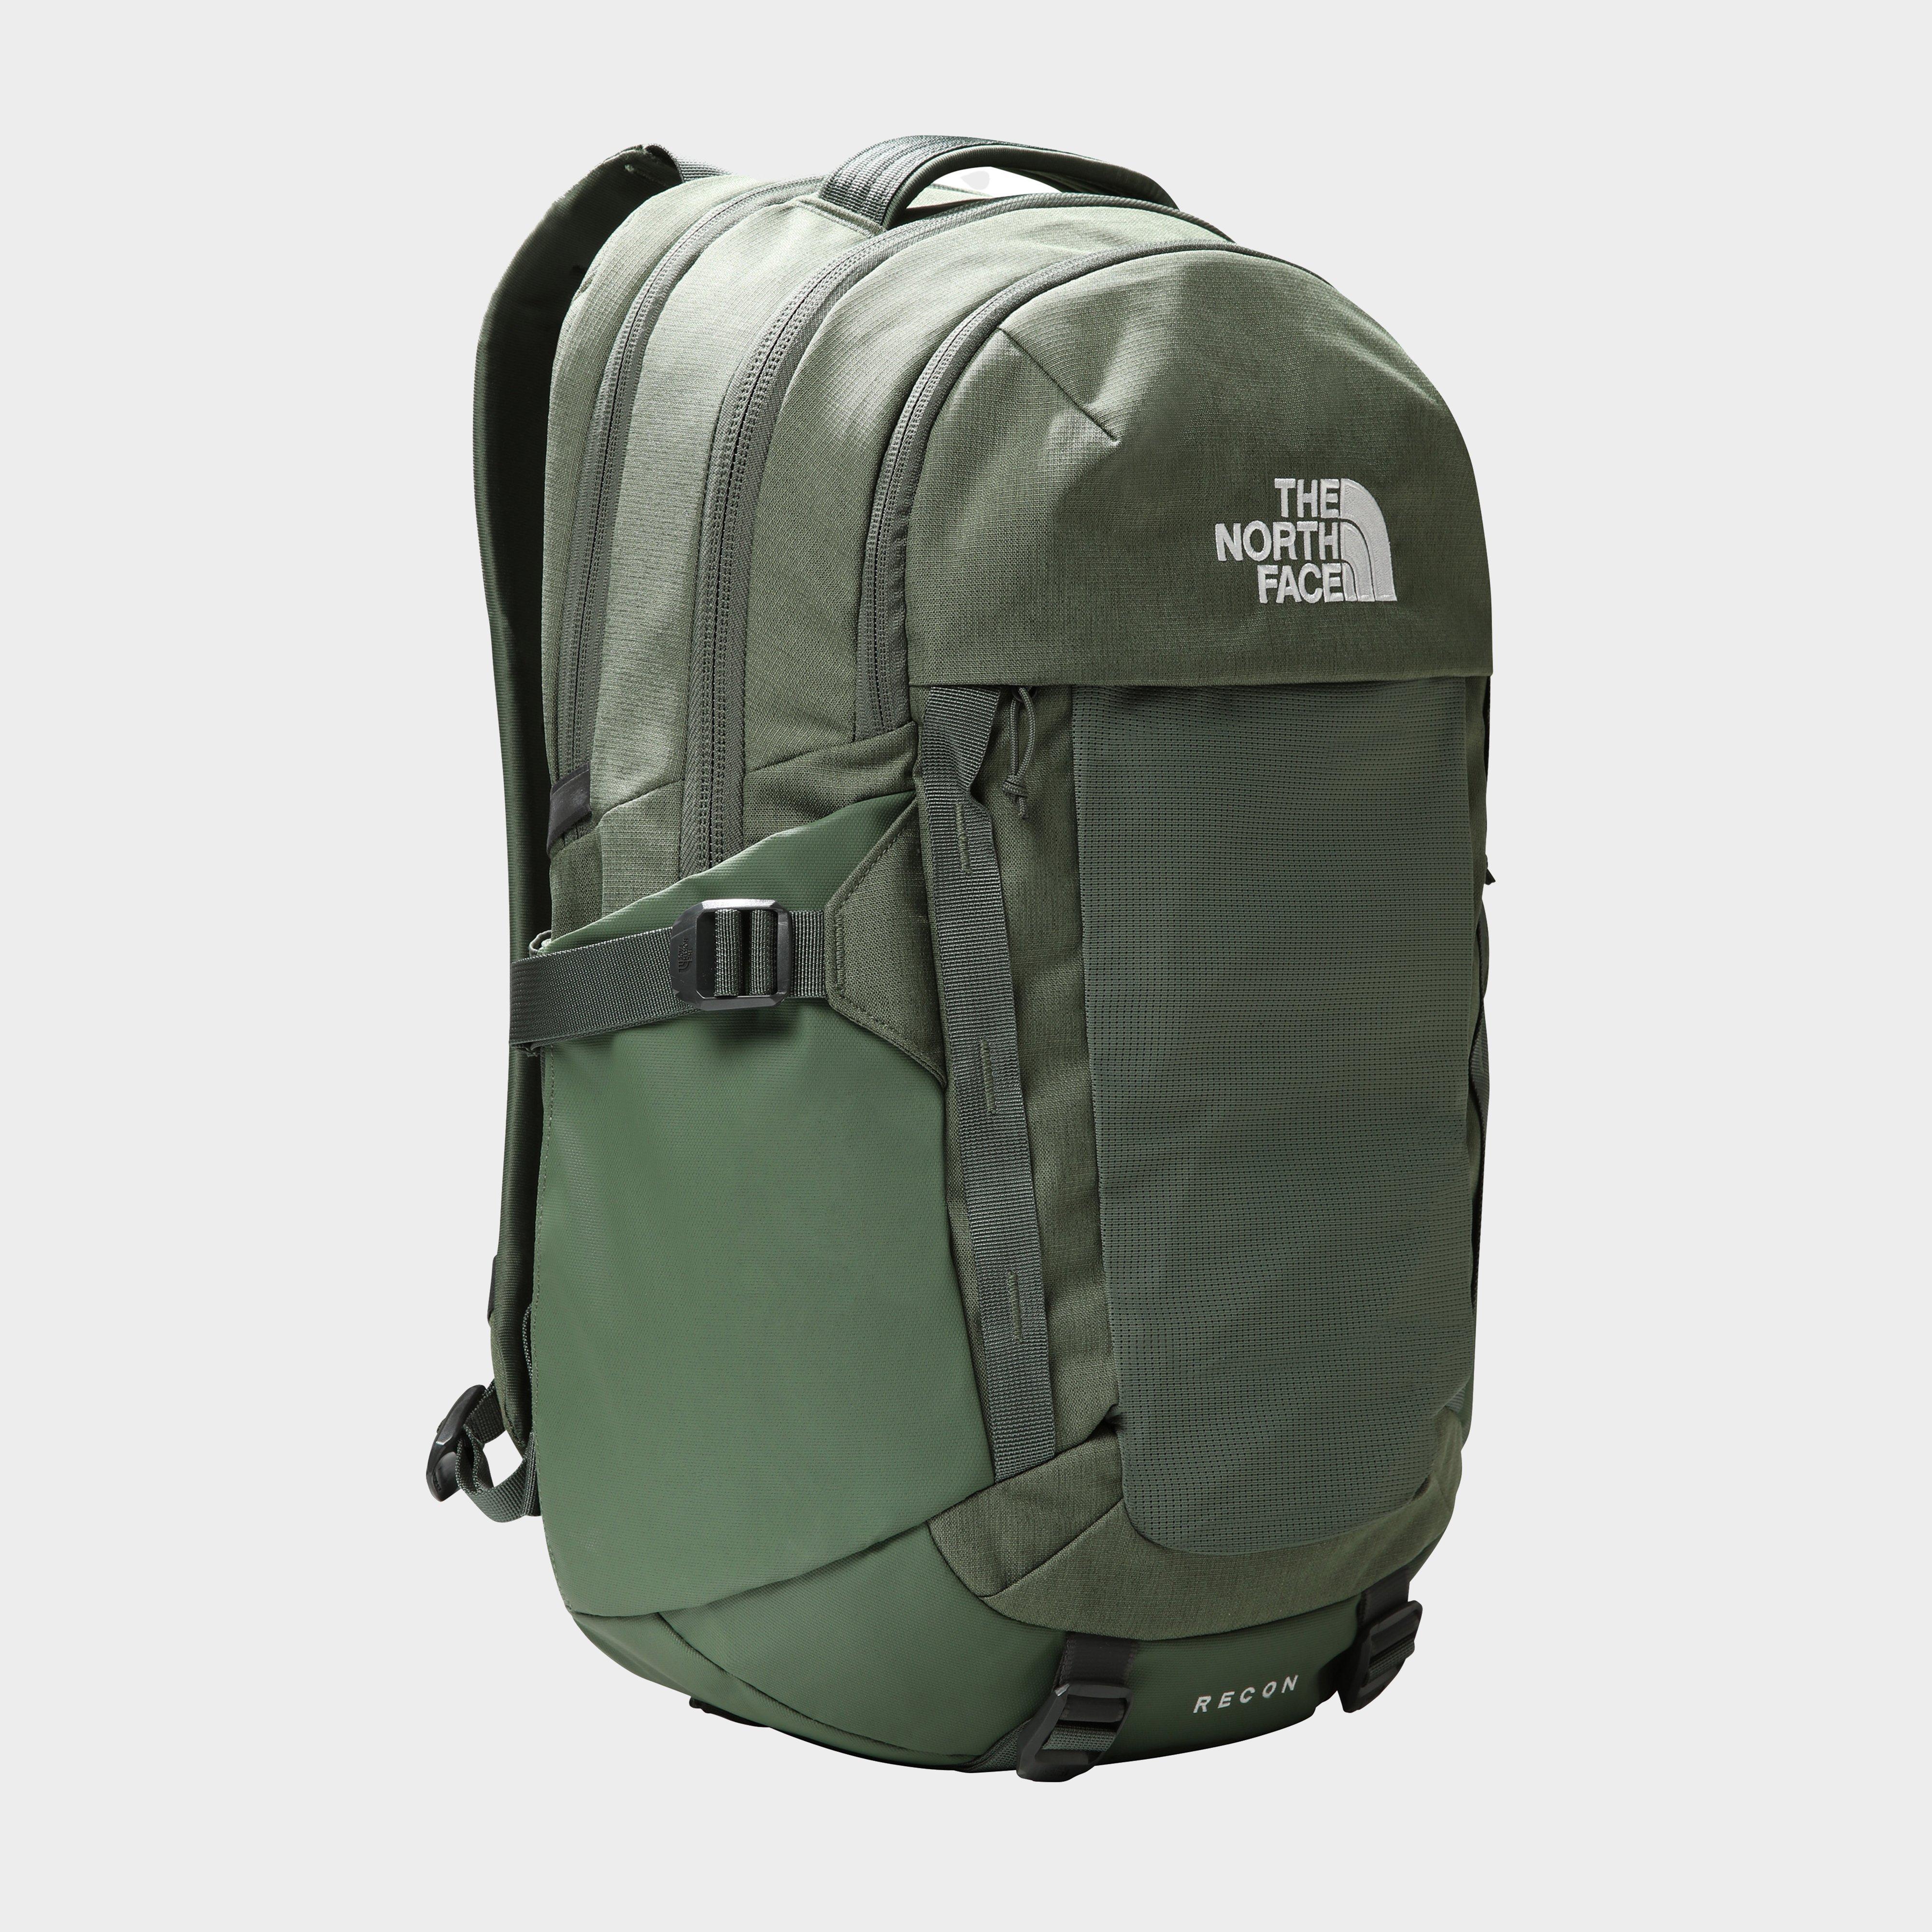 The North Face Recon Rucksack - Green/green  Green/green